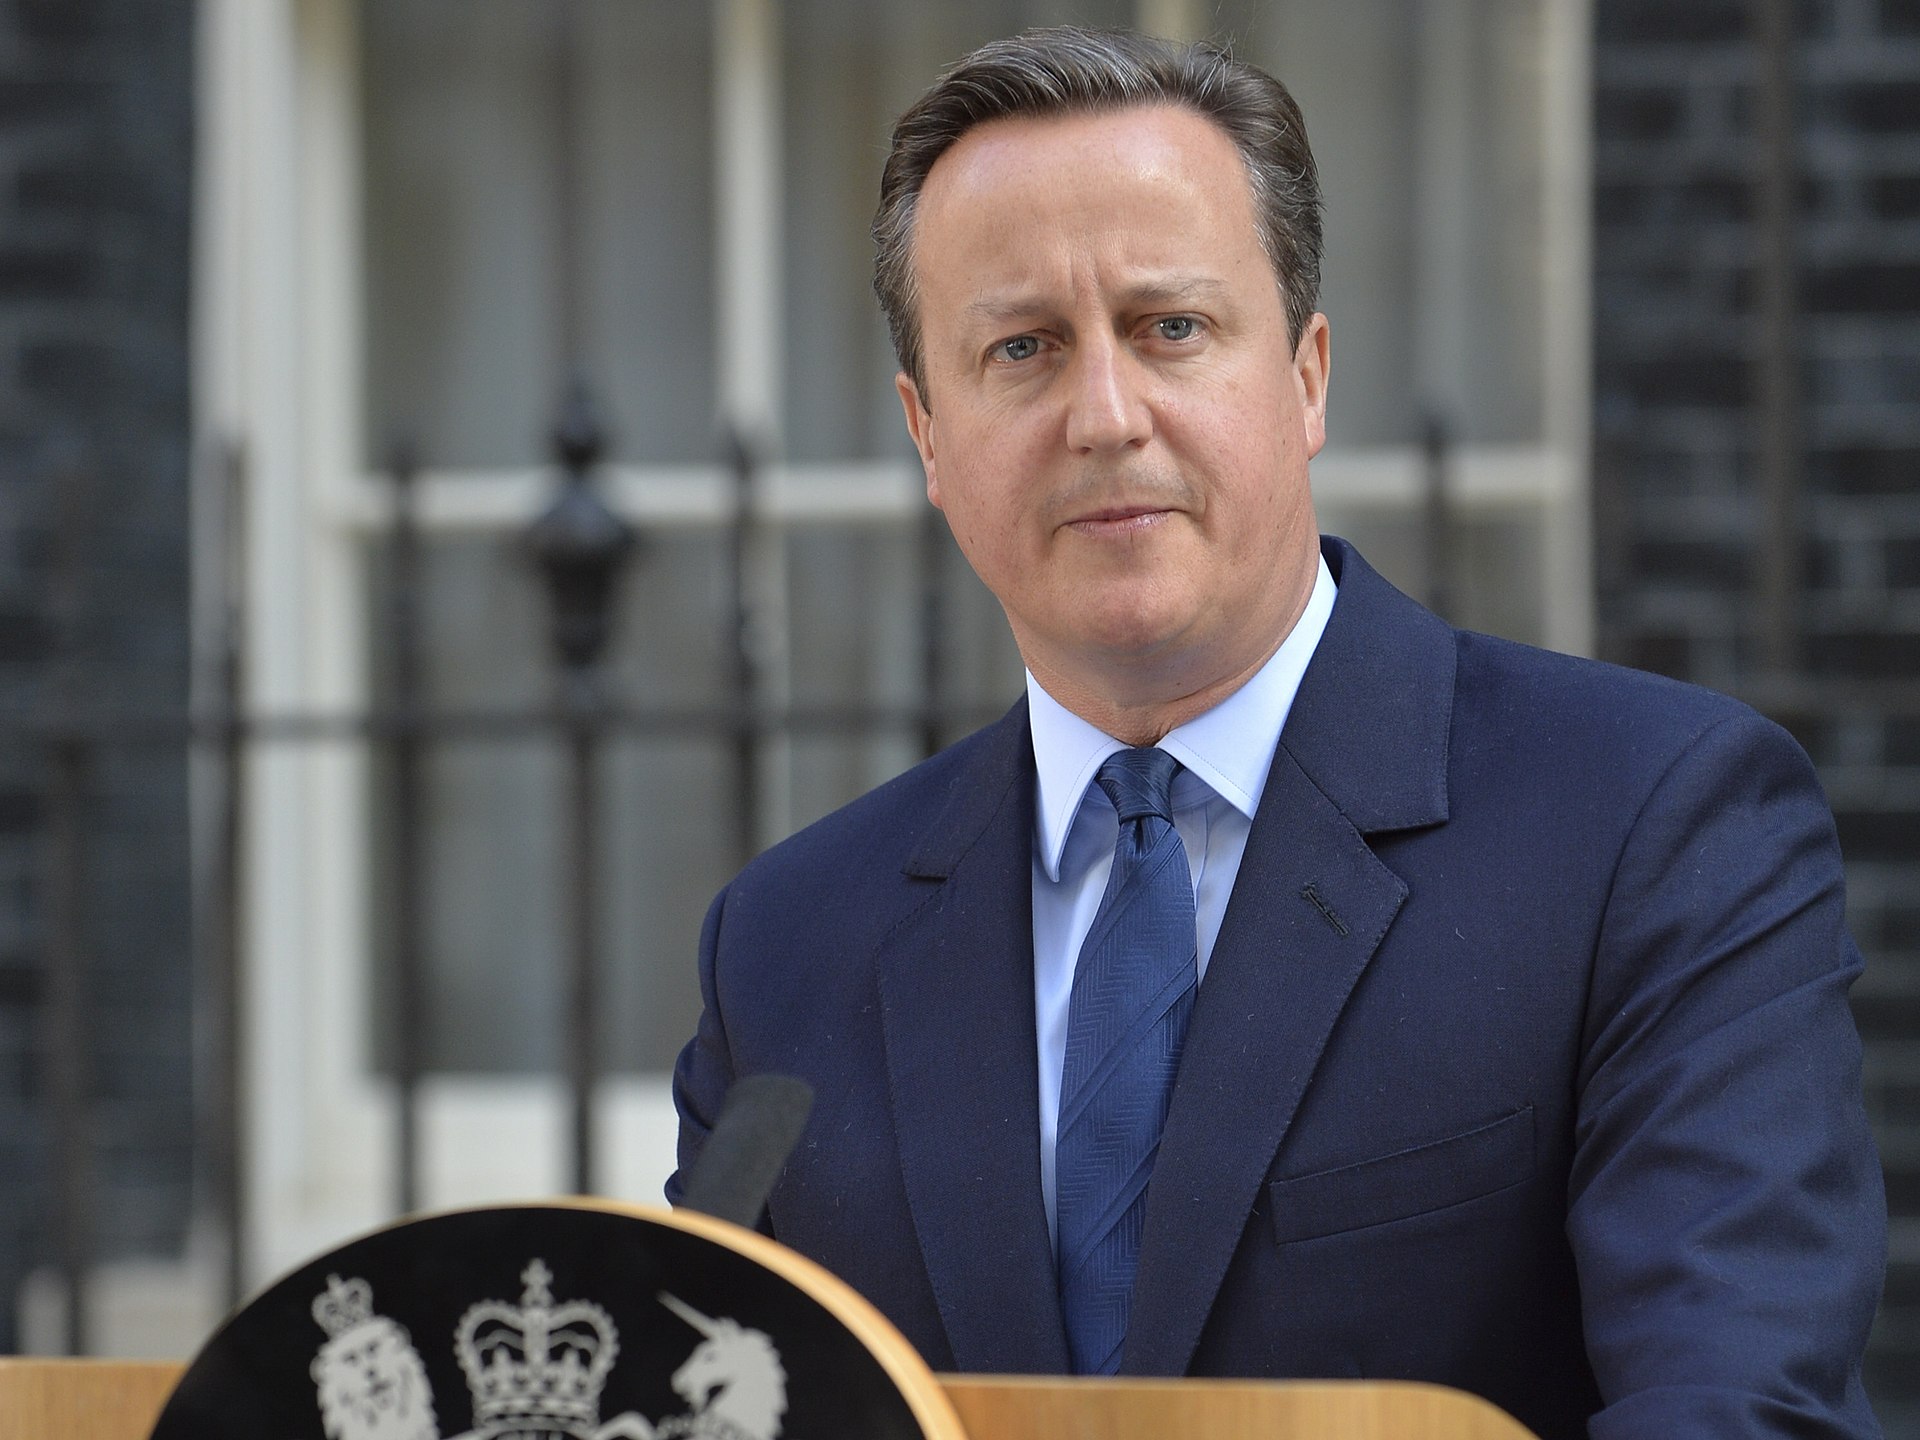 David Cameron appointed as foreign secretary in shock comeback - Jewish ...